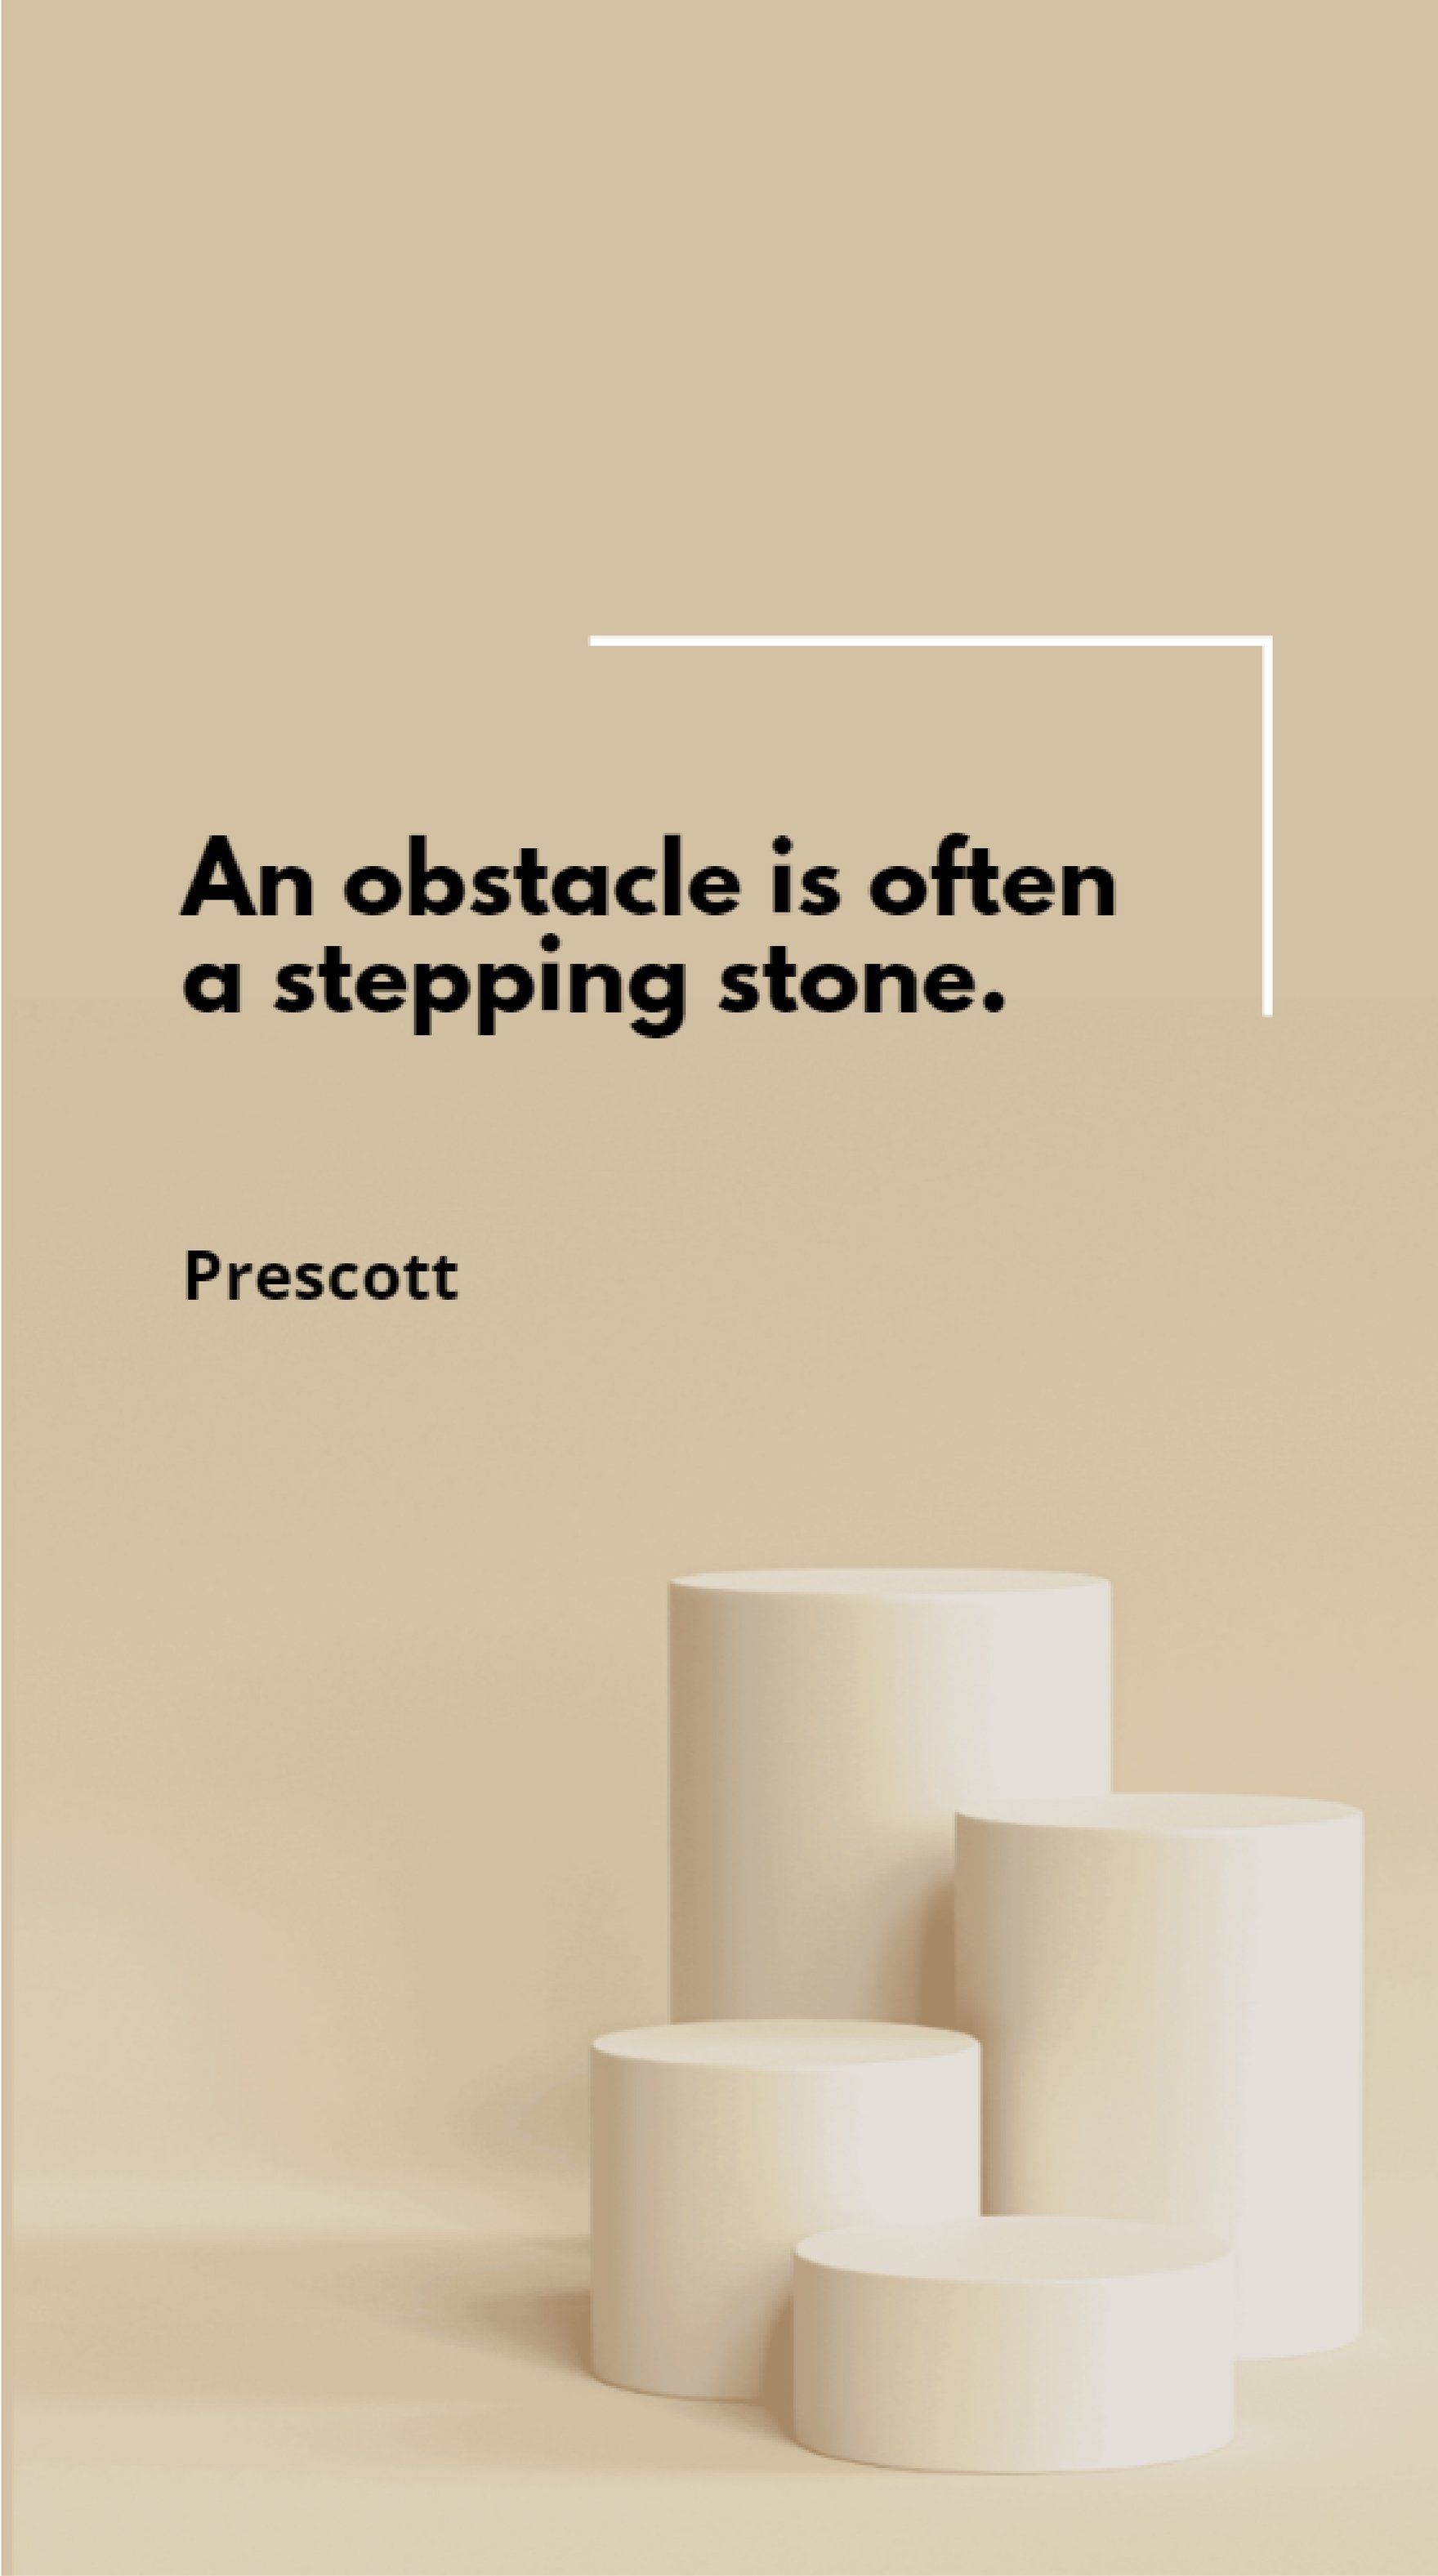 Prescott - An obstacle is often a stepping stone